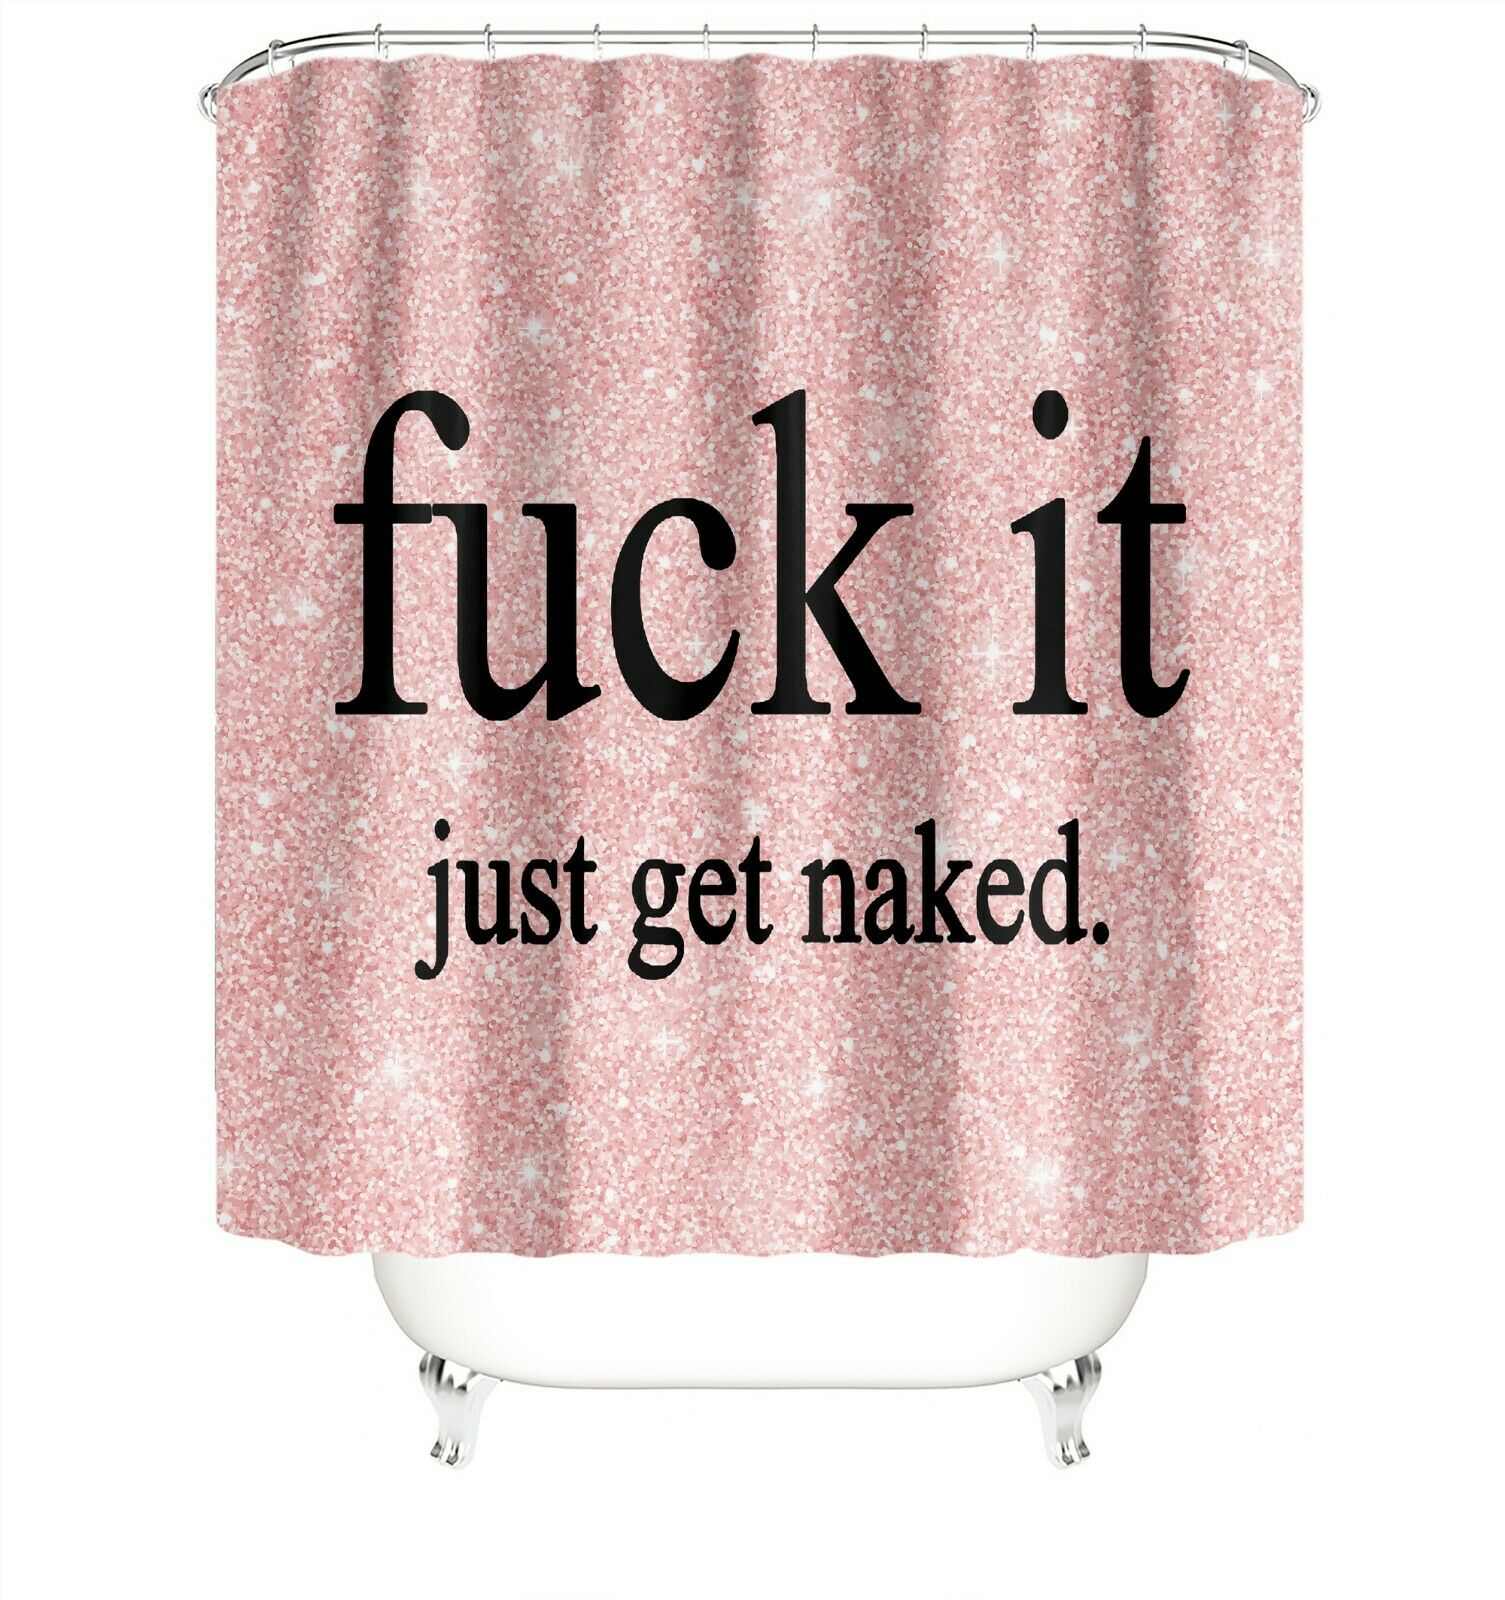 Fuck it Fabric Shower Curtain For Bathroom-STYLEGOING